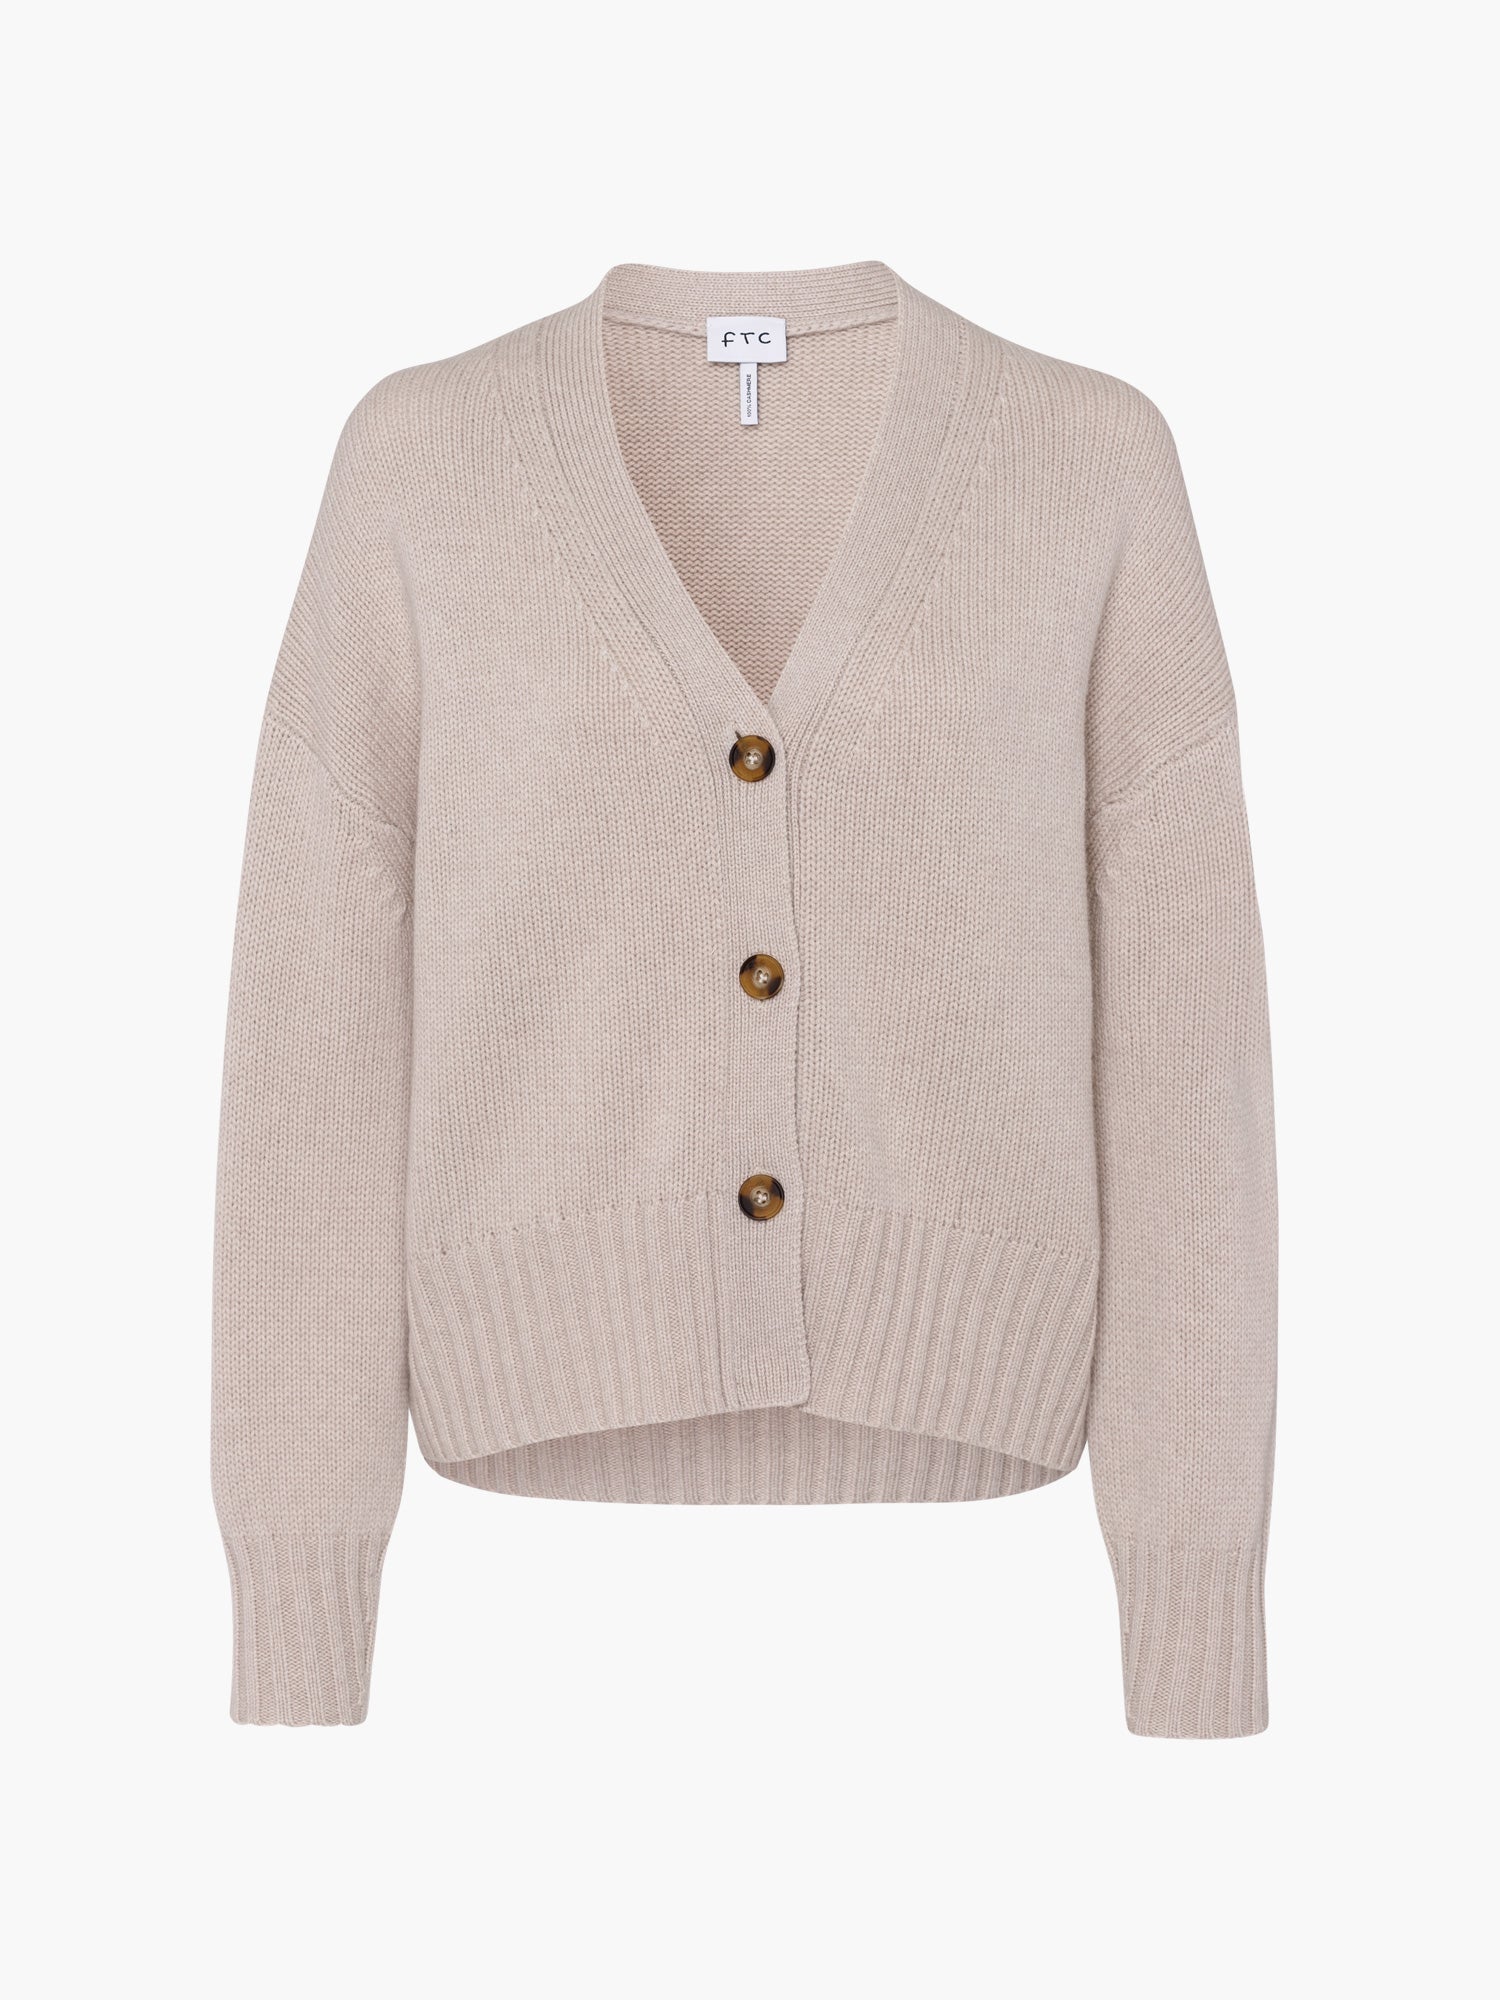 FTC-Cashmere-OUTLET-SALE-Cardigan-VN-Strick-ARCHIVE-COLLECTION_b3da69fb-ae4f-442b-b635-92258689bd2a.jpg